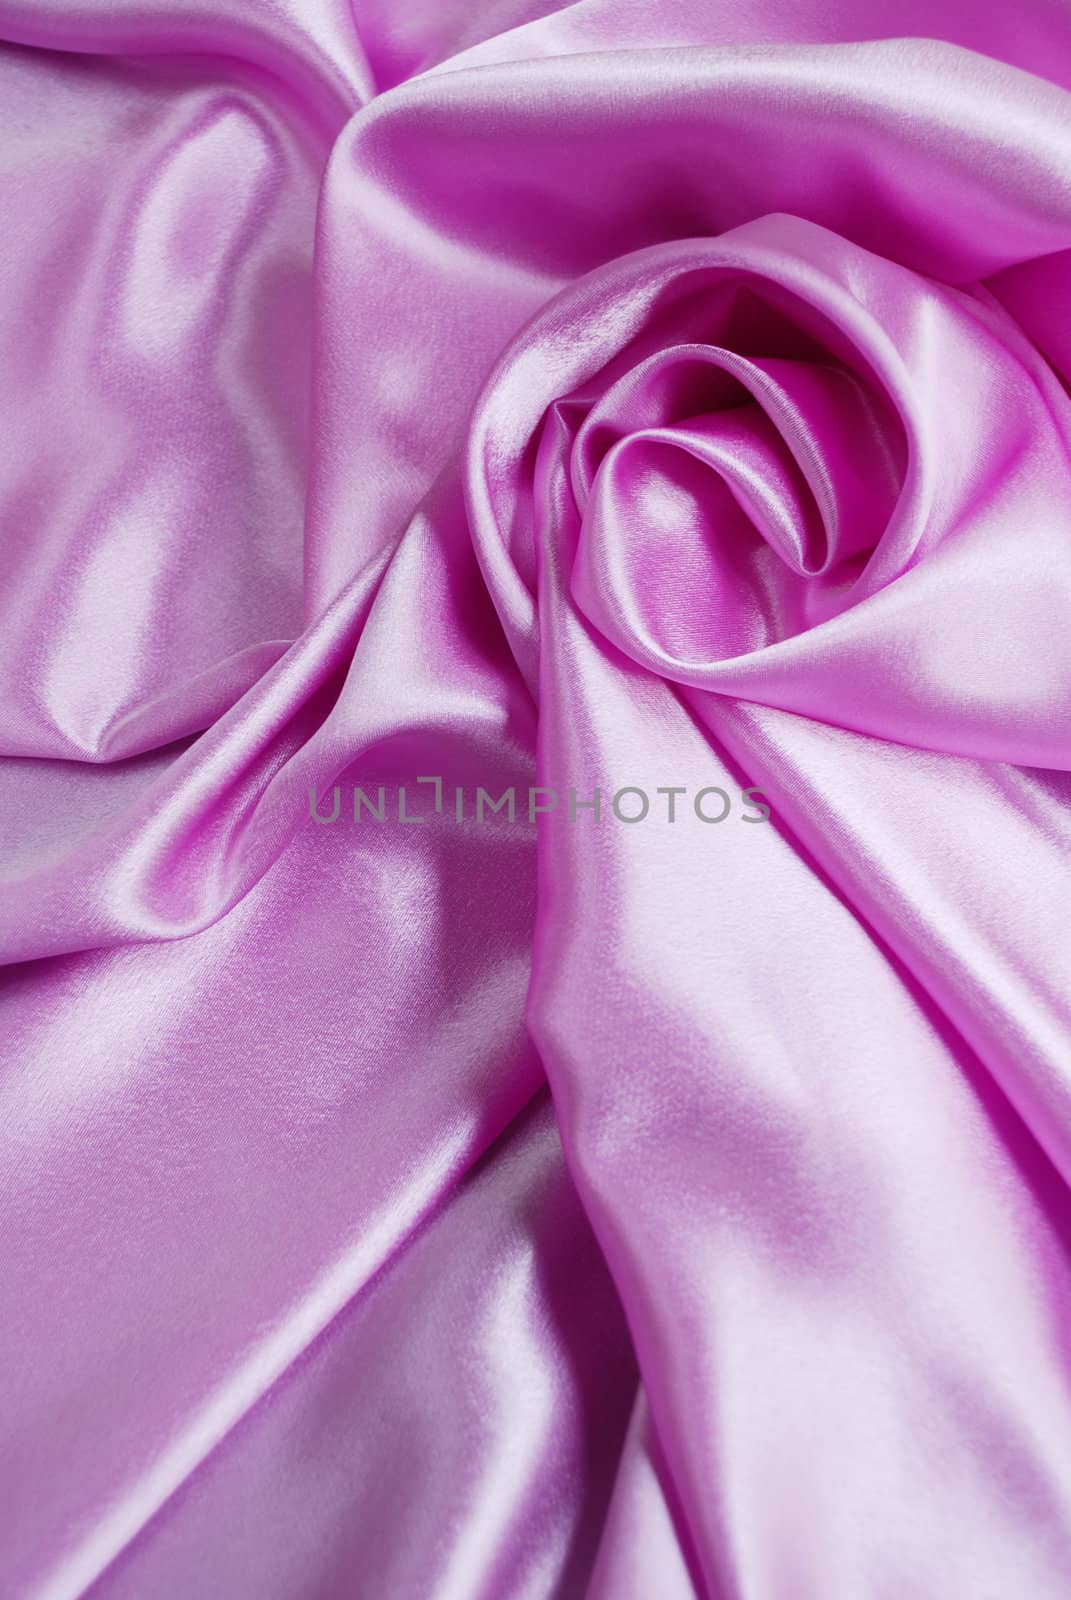 Pink satin with a folds